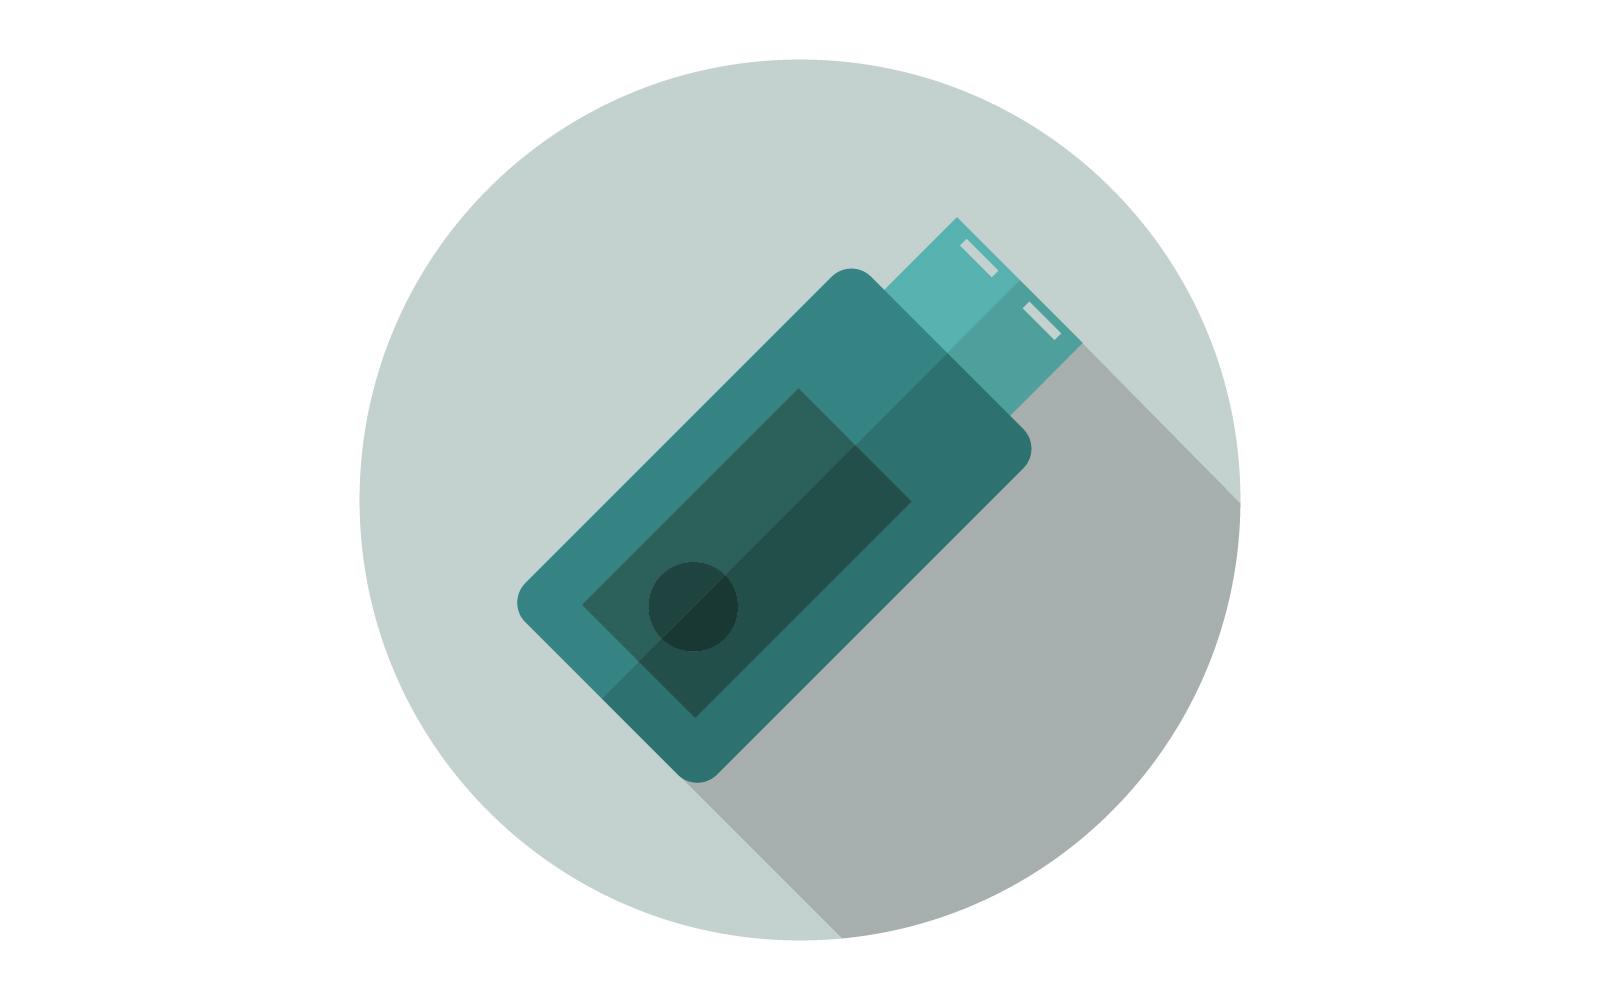 Vectorized usb drive on white and colored background